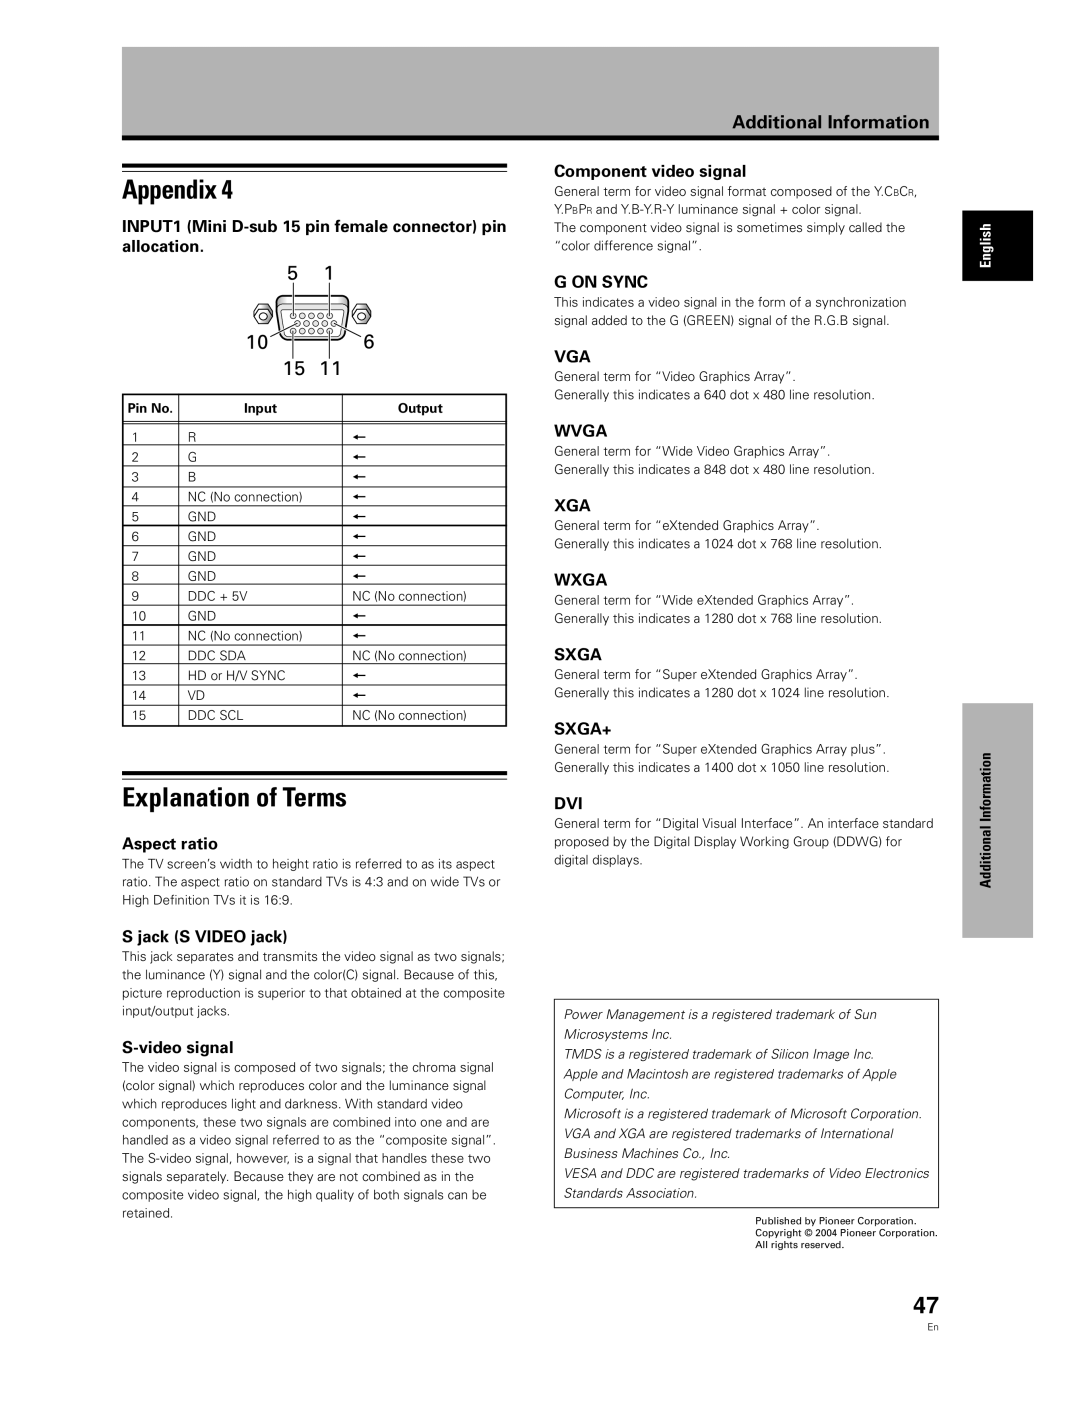 Pioneer PDA-5003 Explanation of Terms, Appendix, INPUT1 Mini D-sub 15 pin female connector pin allocation, G On Sync, Wvga 